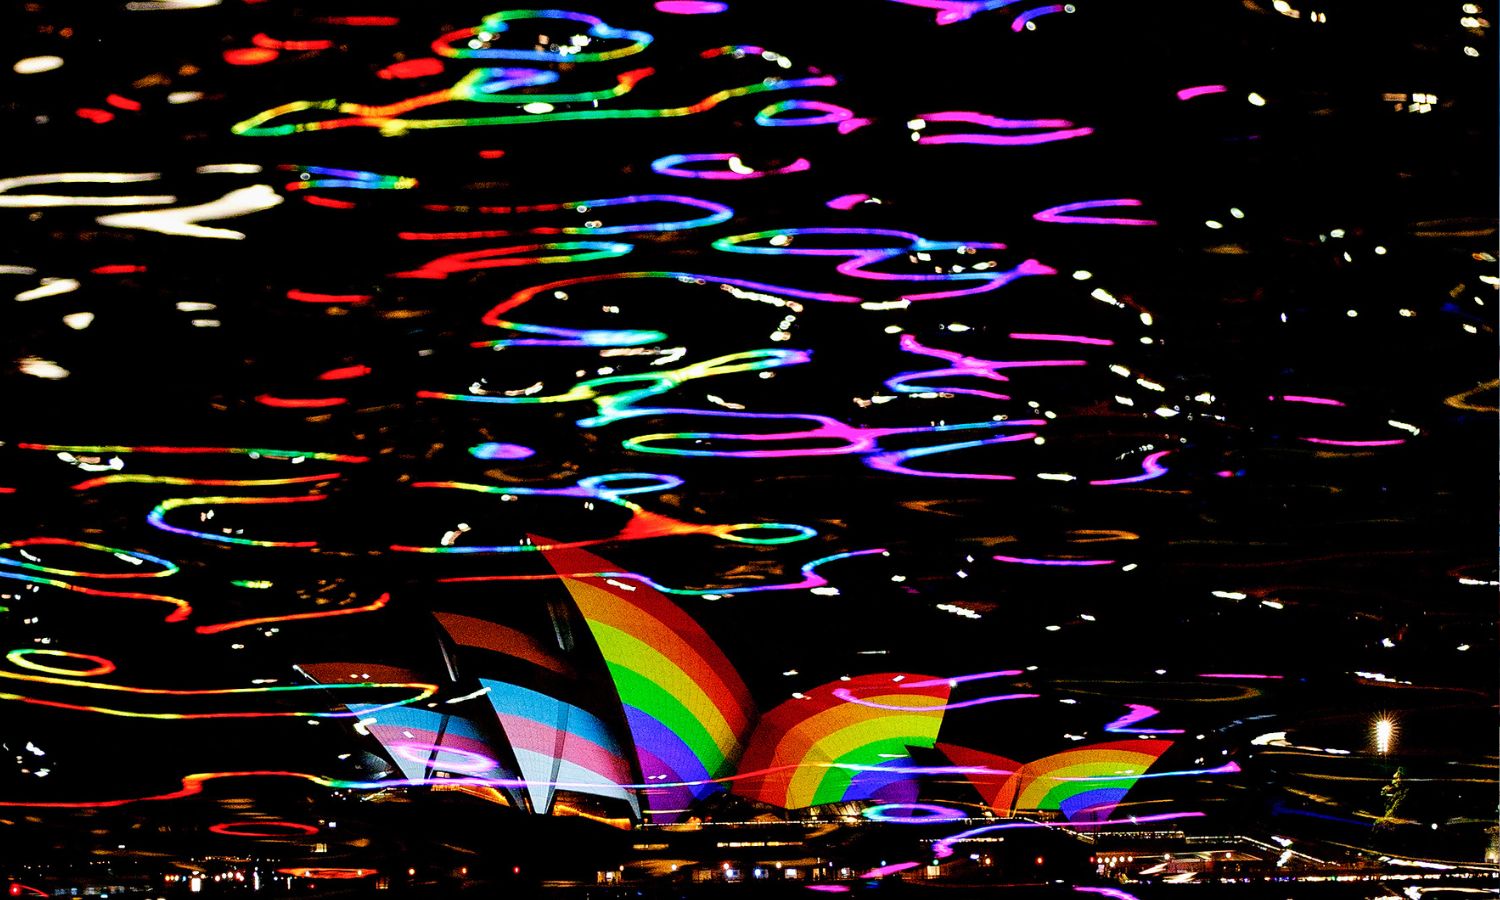 An image of the Opera House in Sydney lit up with the LGBTQIA+ pride flag to illustrate homophobia in Australia